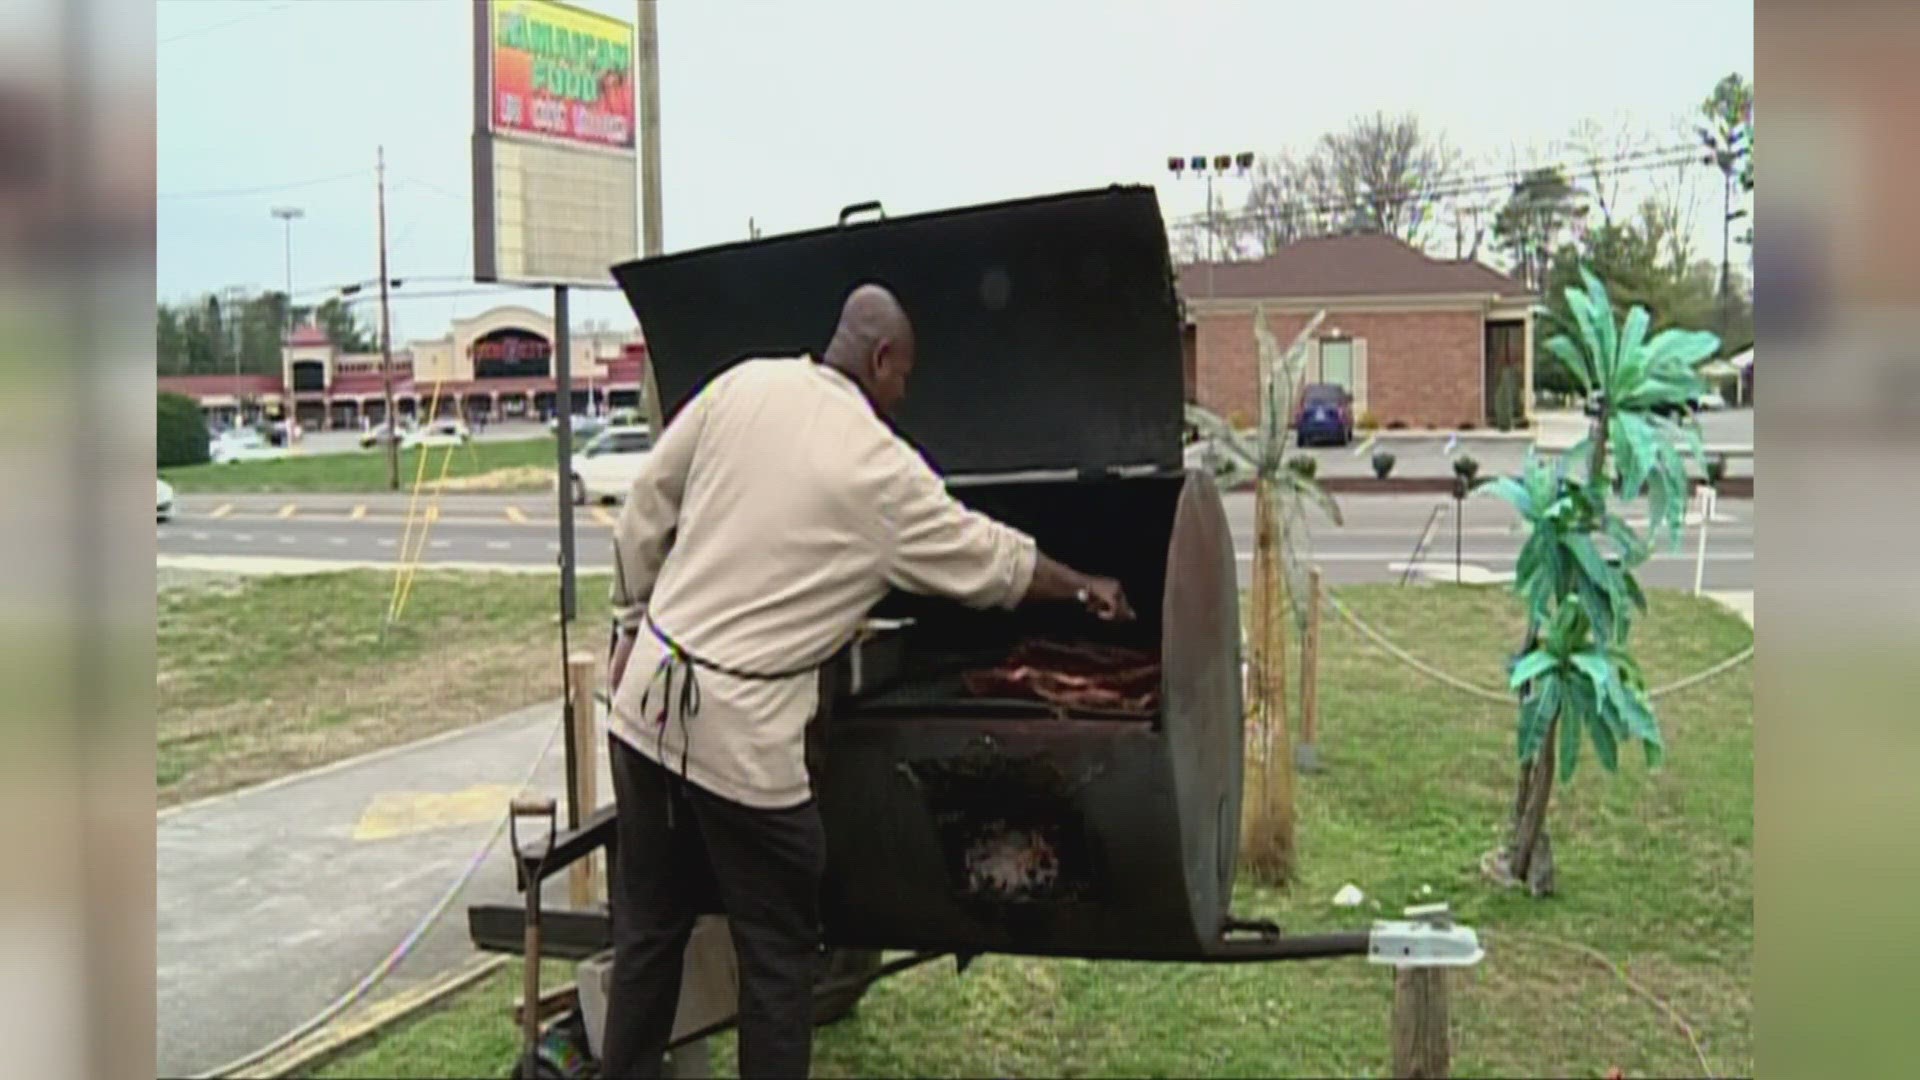 Thousands of dollars have already been raised for the Rocky's Jamaica Sunrise food truck.